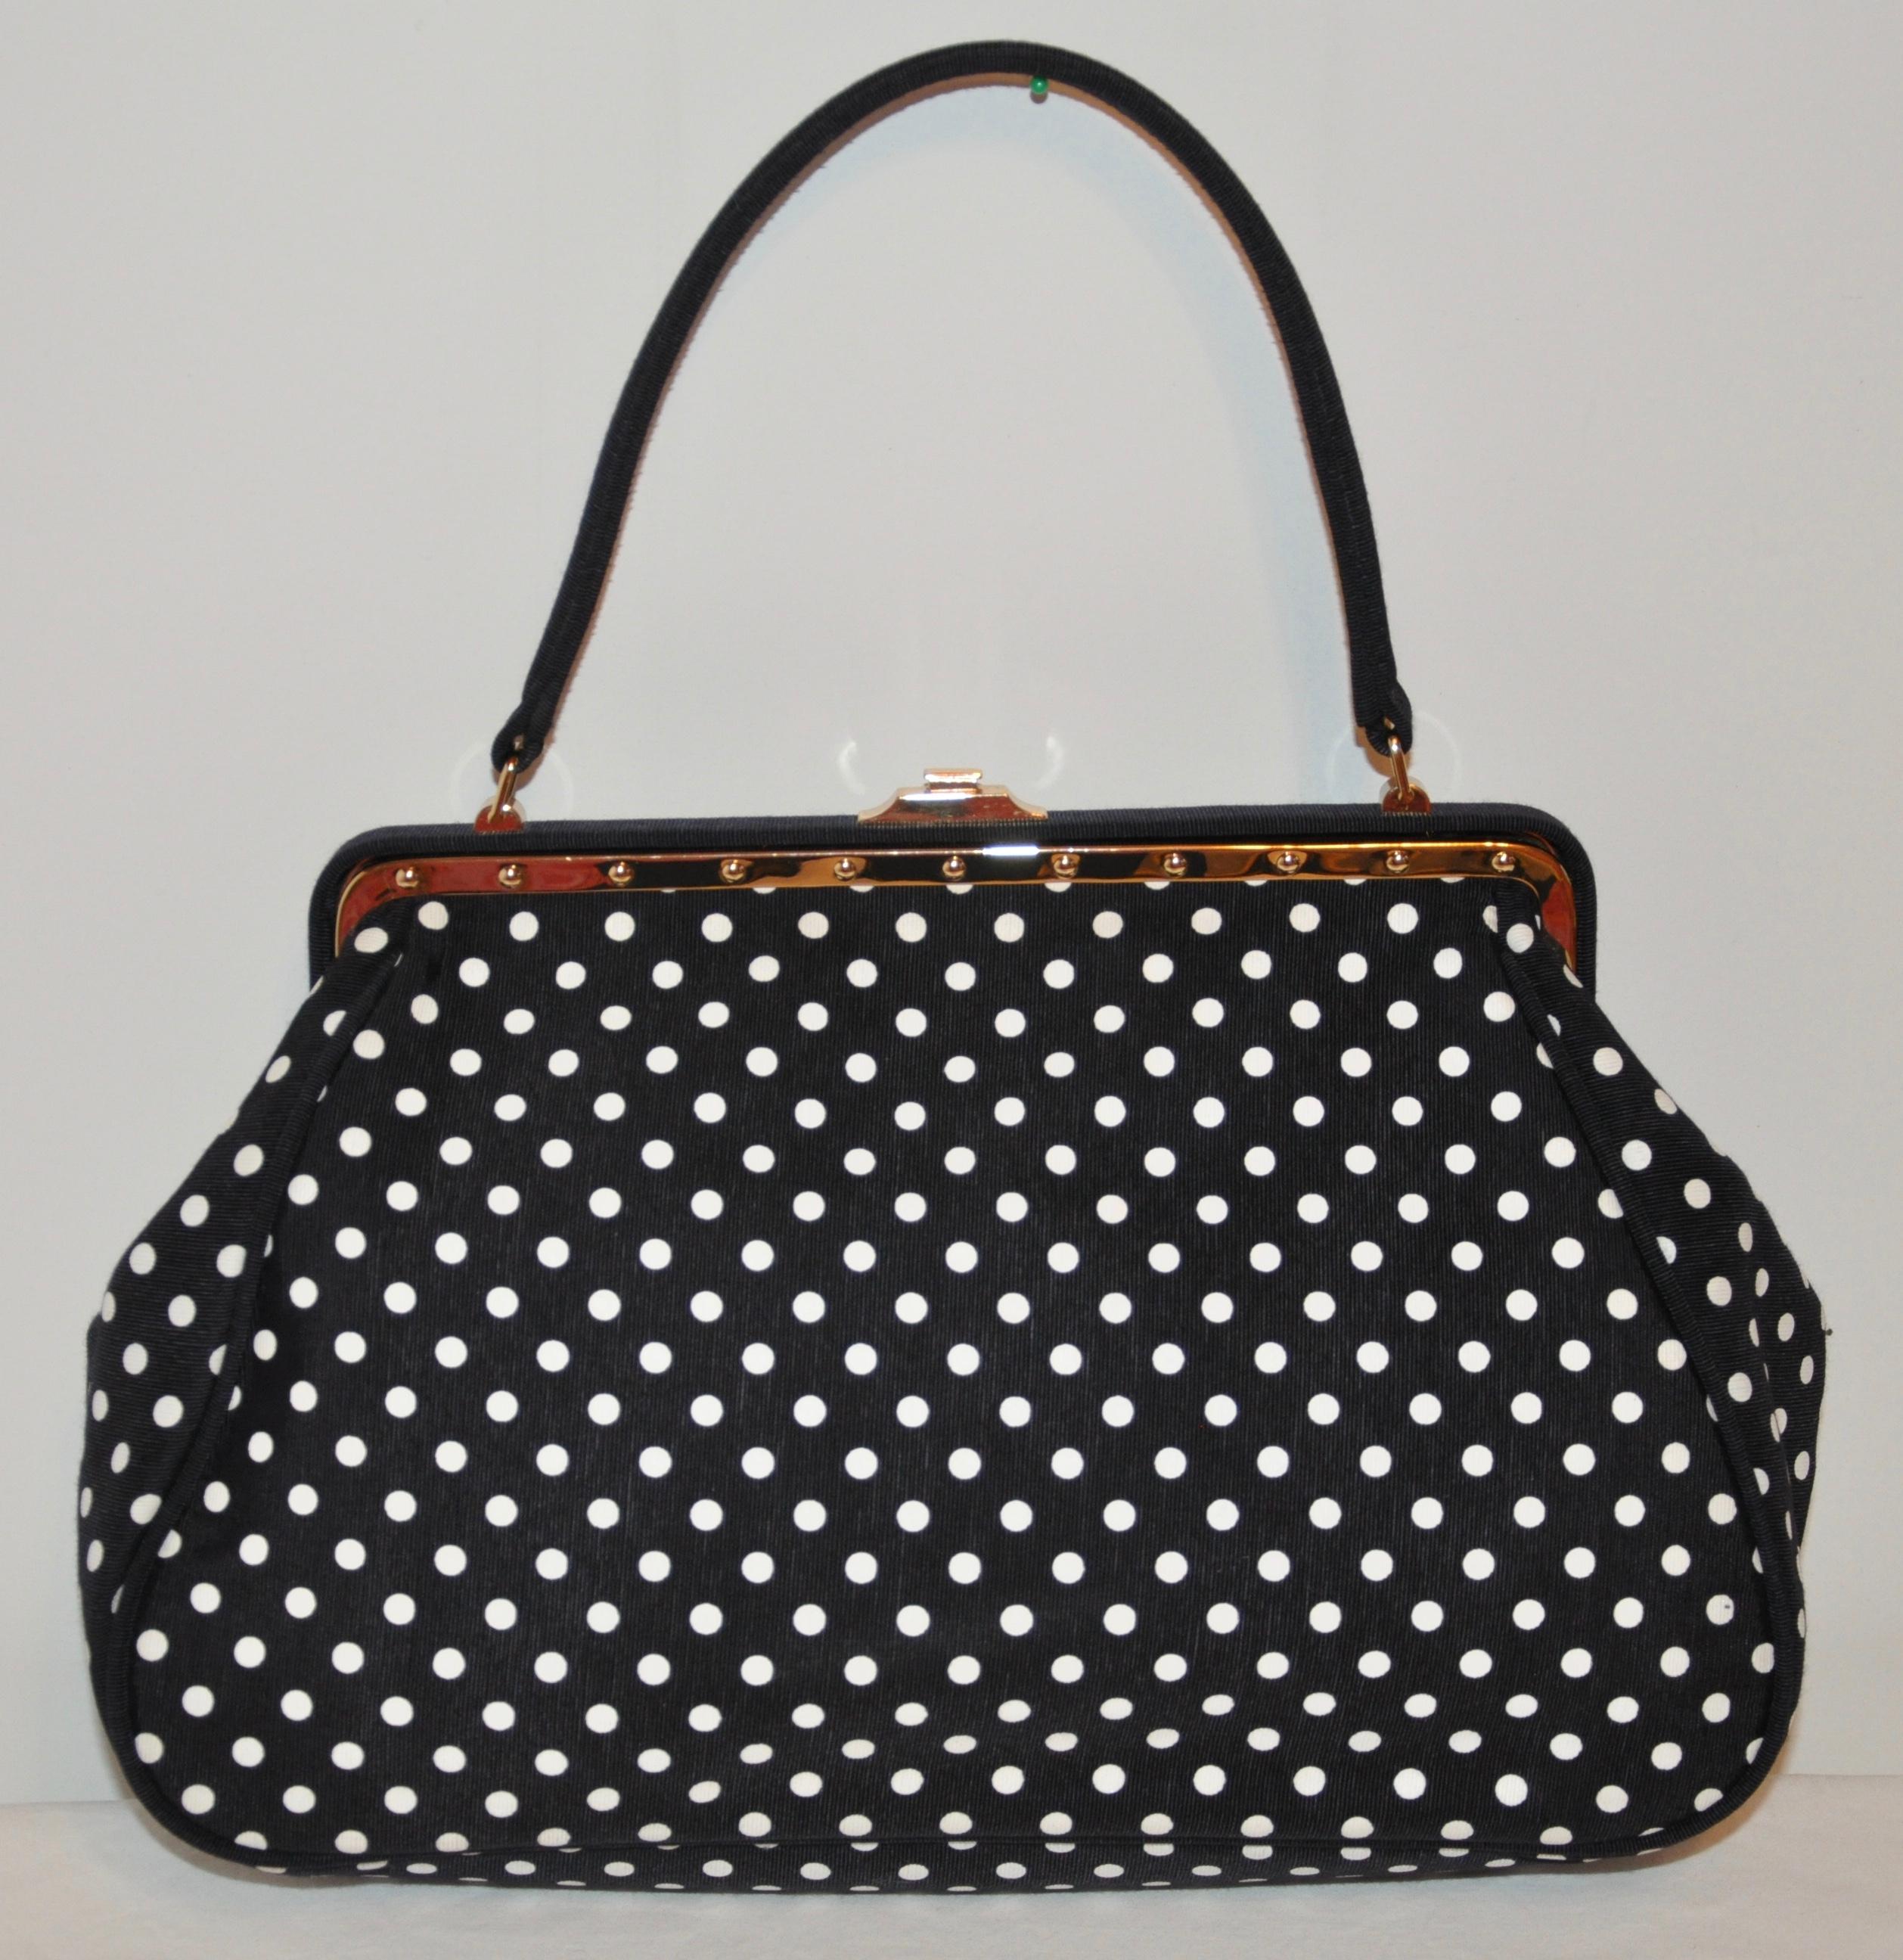 Moschino Black with White Polka Dot and Gilded Gold Hardware Accent Handbag In Good Condition For Sale In New York, NY